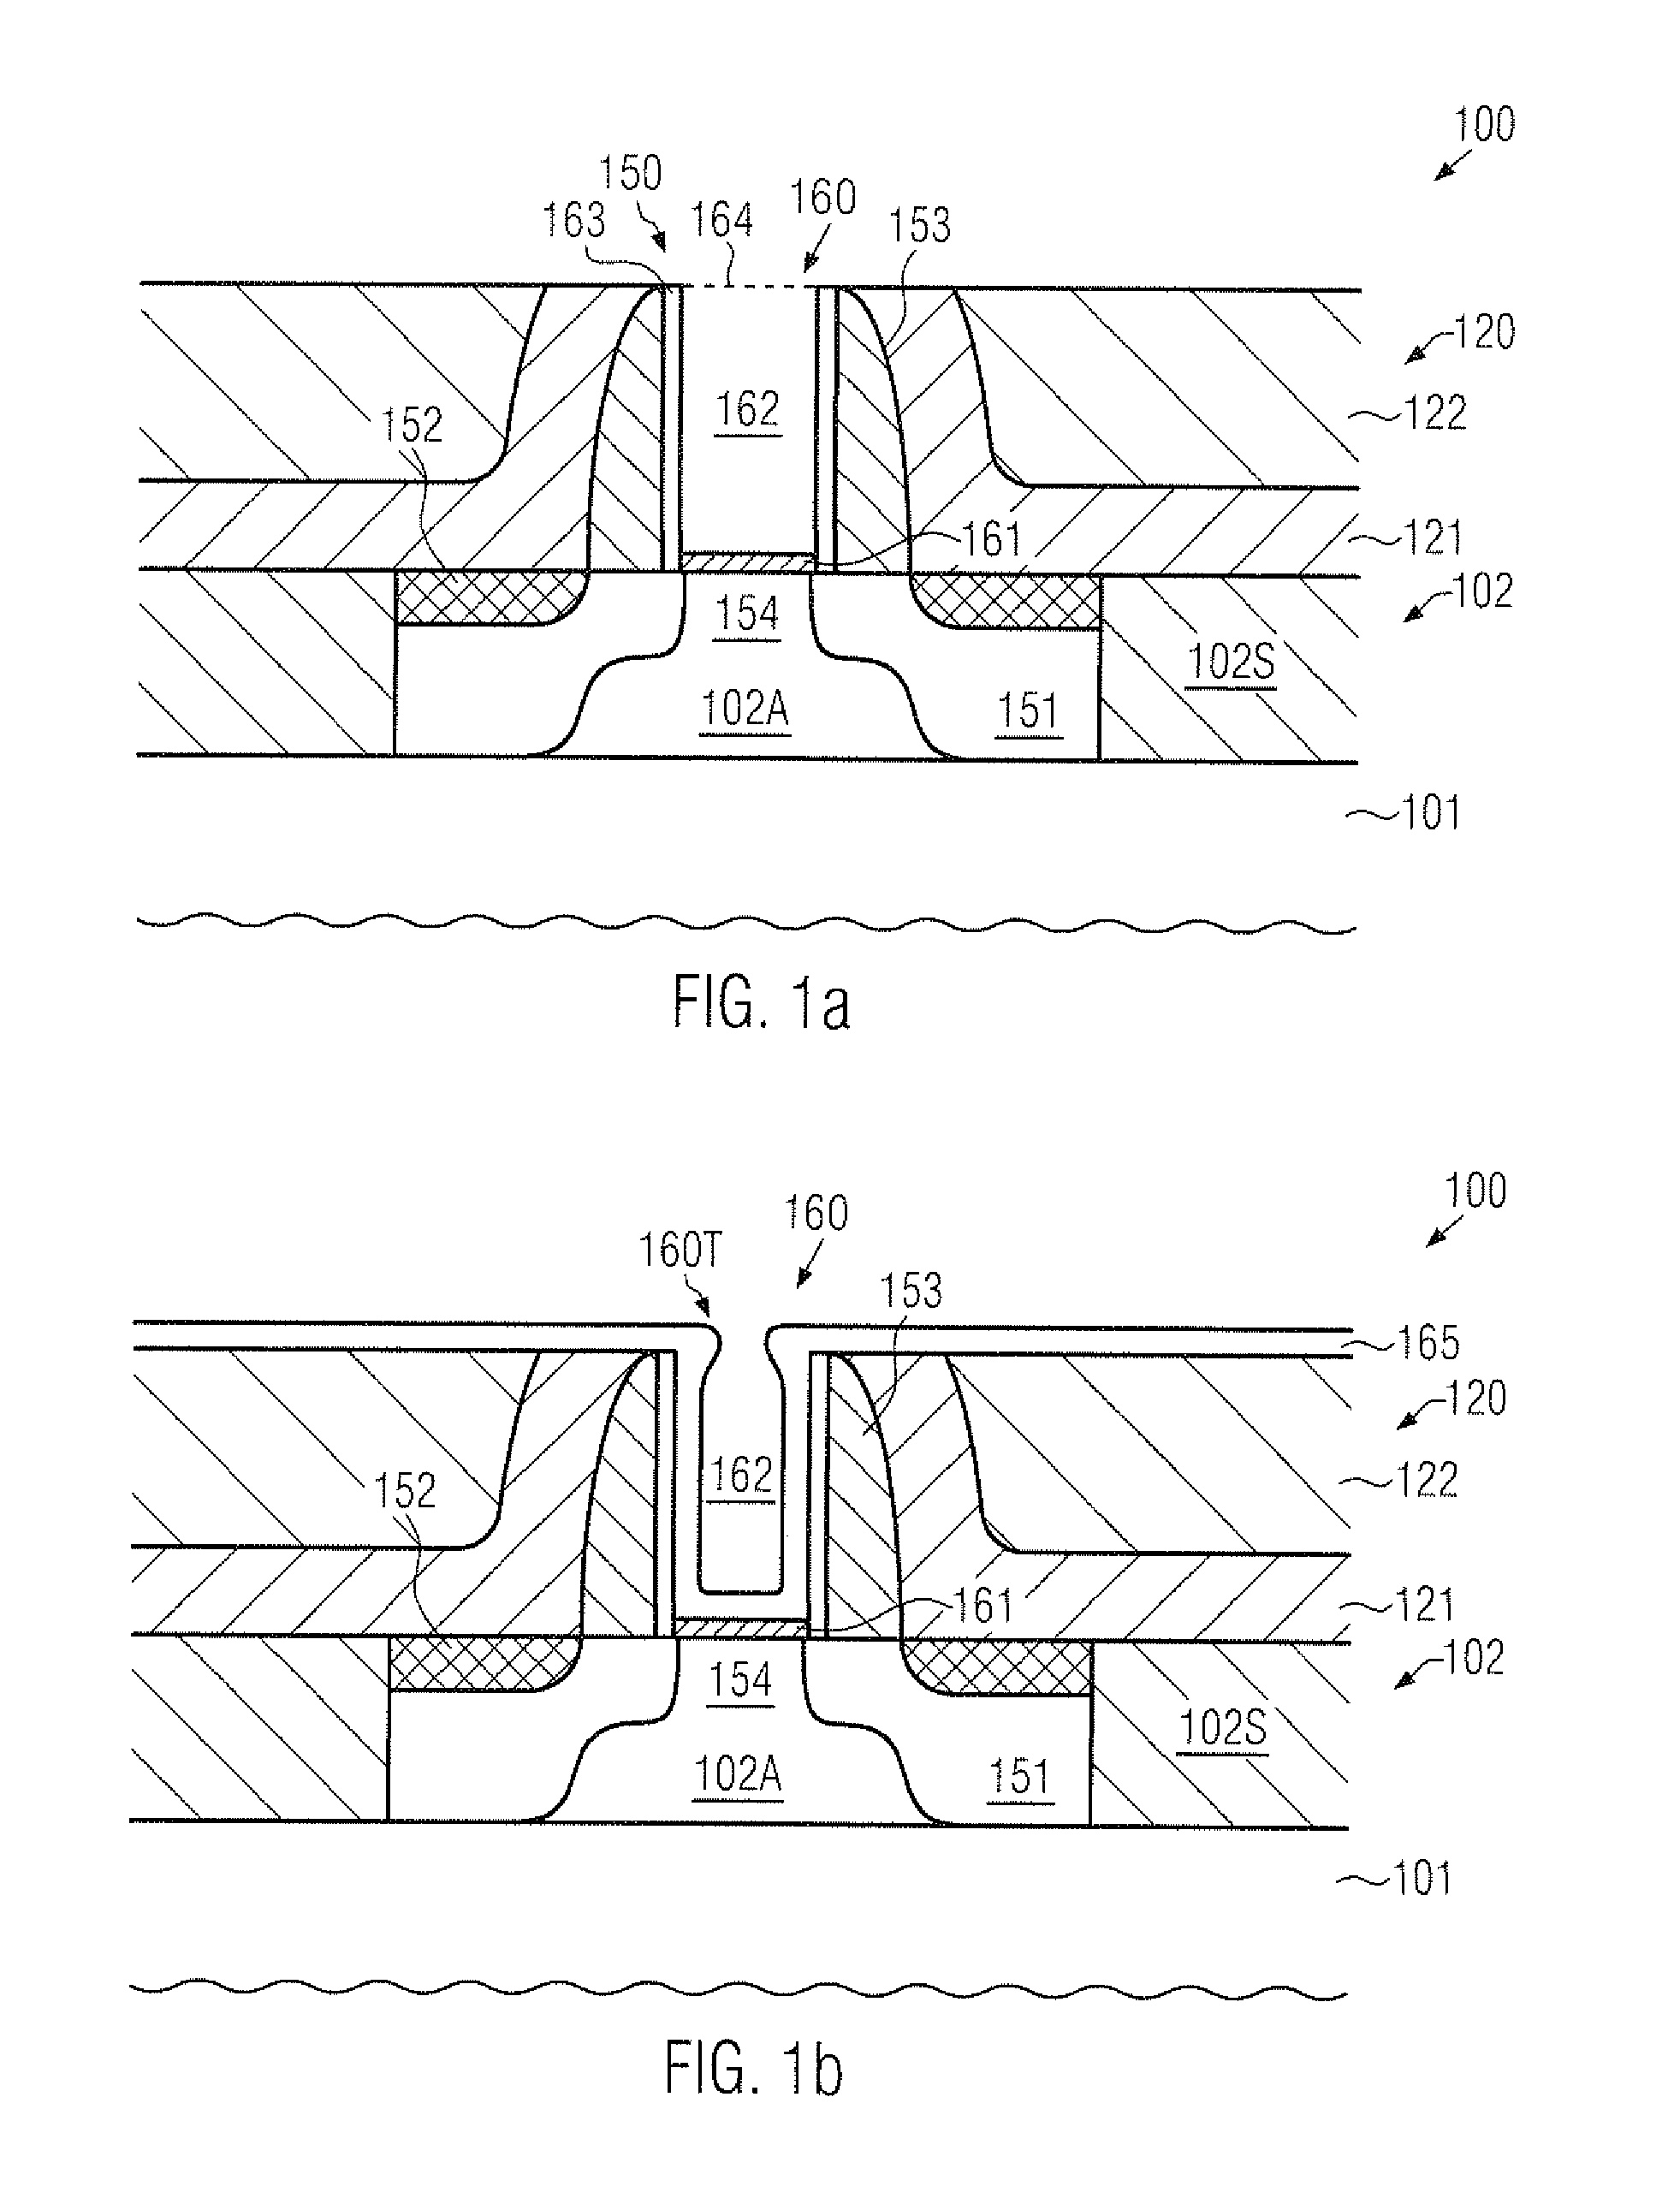 Replacement gate approach based on a reverse offset spacer applied prior to work function metal deposition